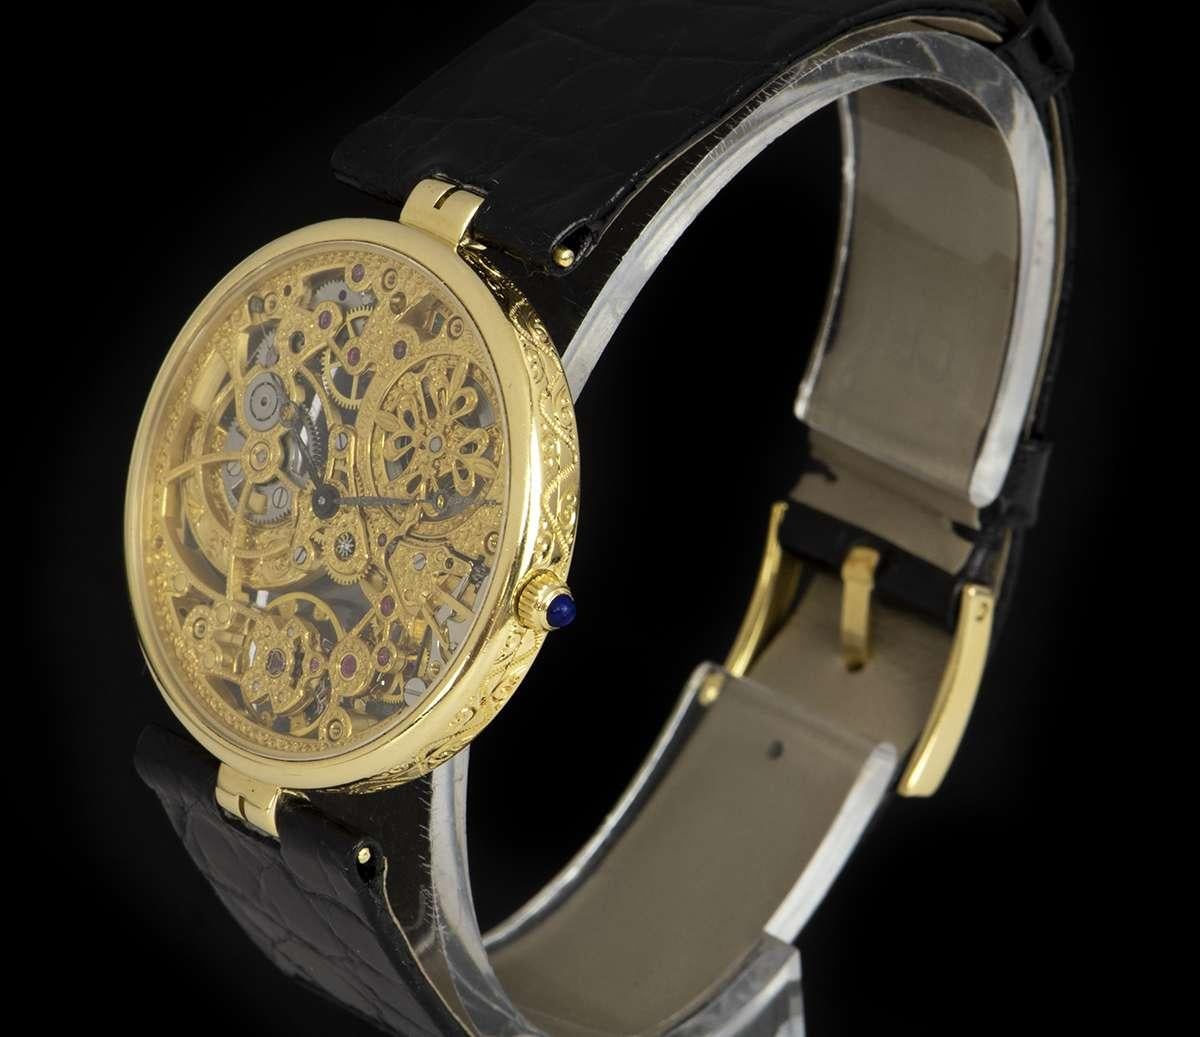 A Very Rare 18k Yellow Gold Skeleton Gents Wristwatch, skeleton dial, a fixed 18k yellow gold bezel, a brand new original black leather strap with an original 18k yellow gold pin buckle, sapphire glass, exhibition caseback, automatic movement, in